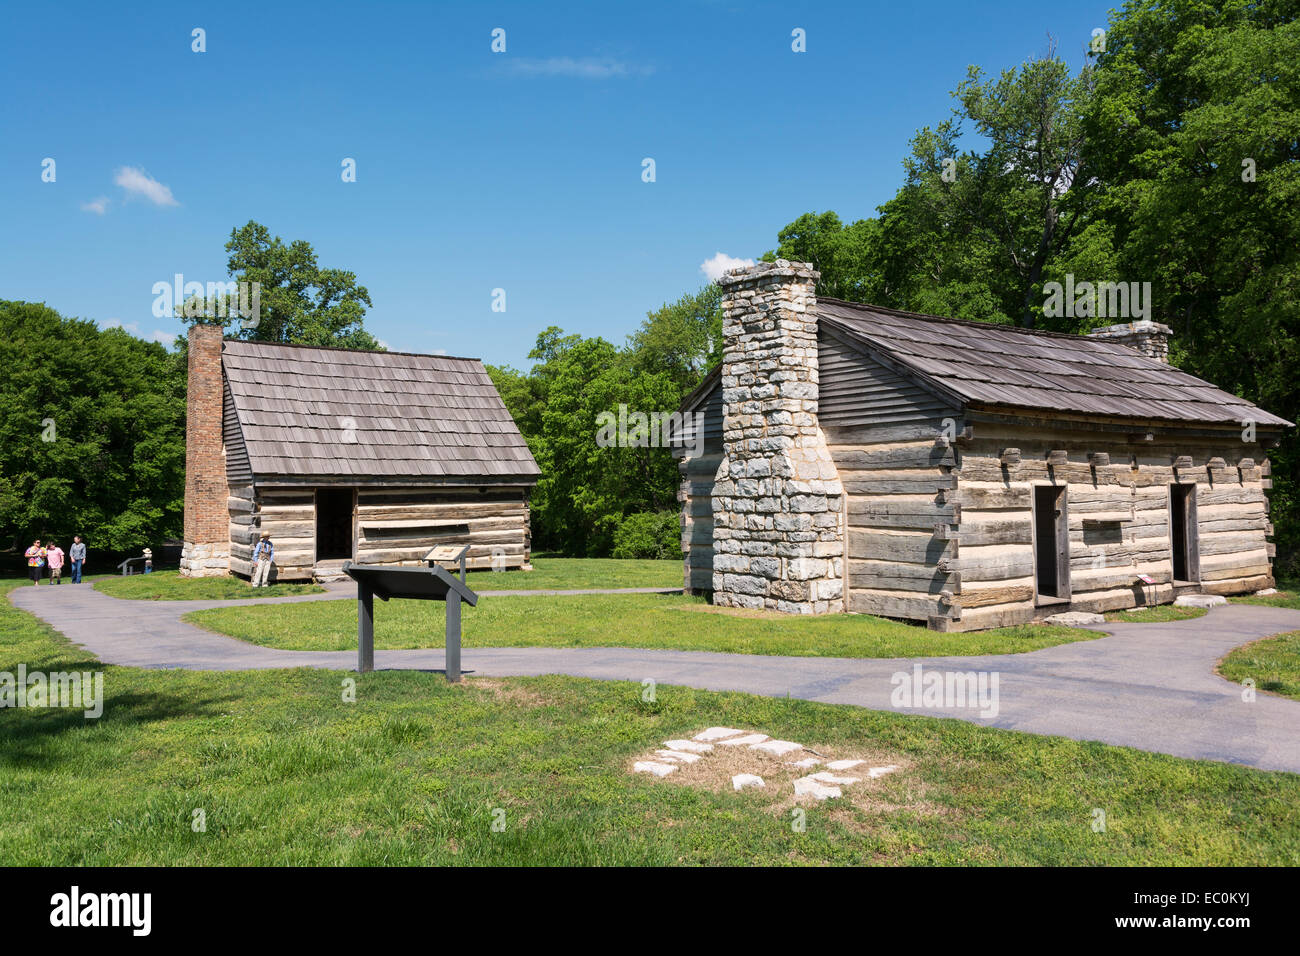 Tennessee, Nashville,  The Hermitage, plantation home of U.S. President Andrew Jackson, outbuildings, young boy serving as guide Stock Photo